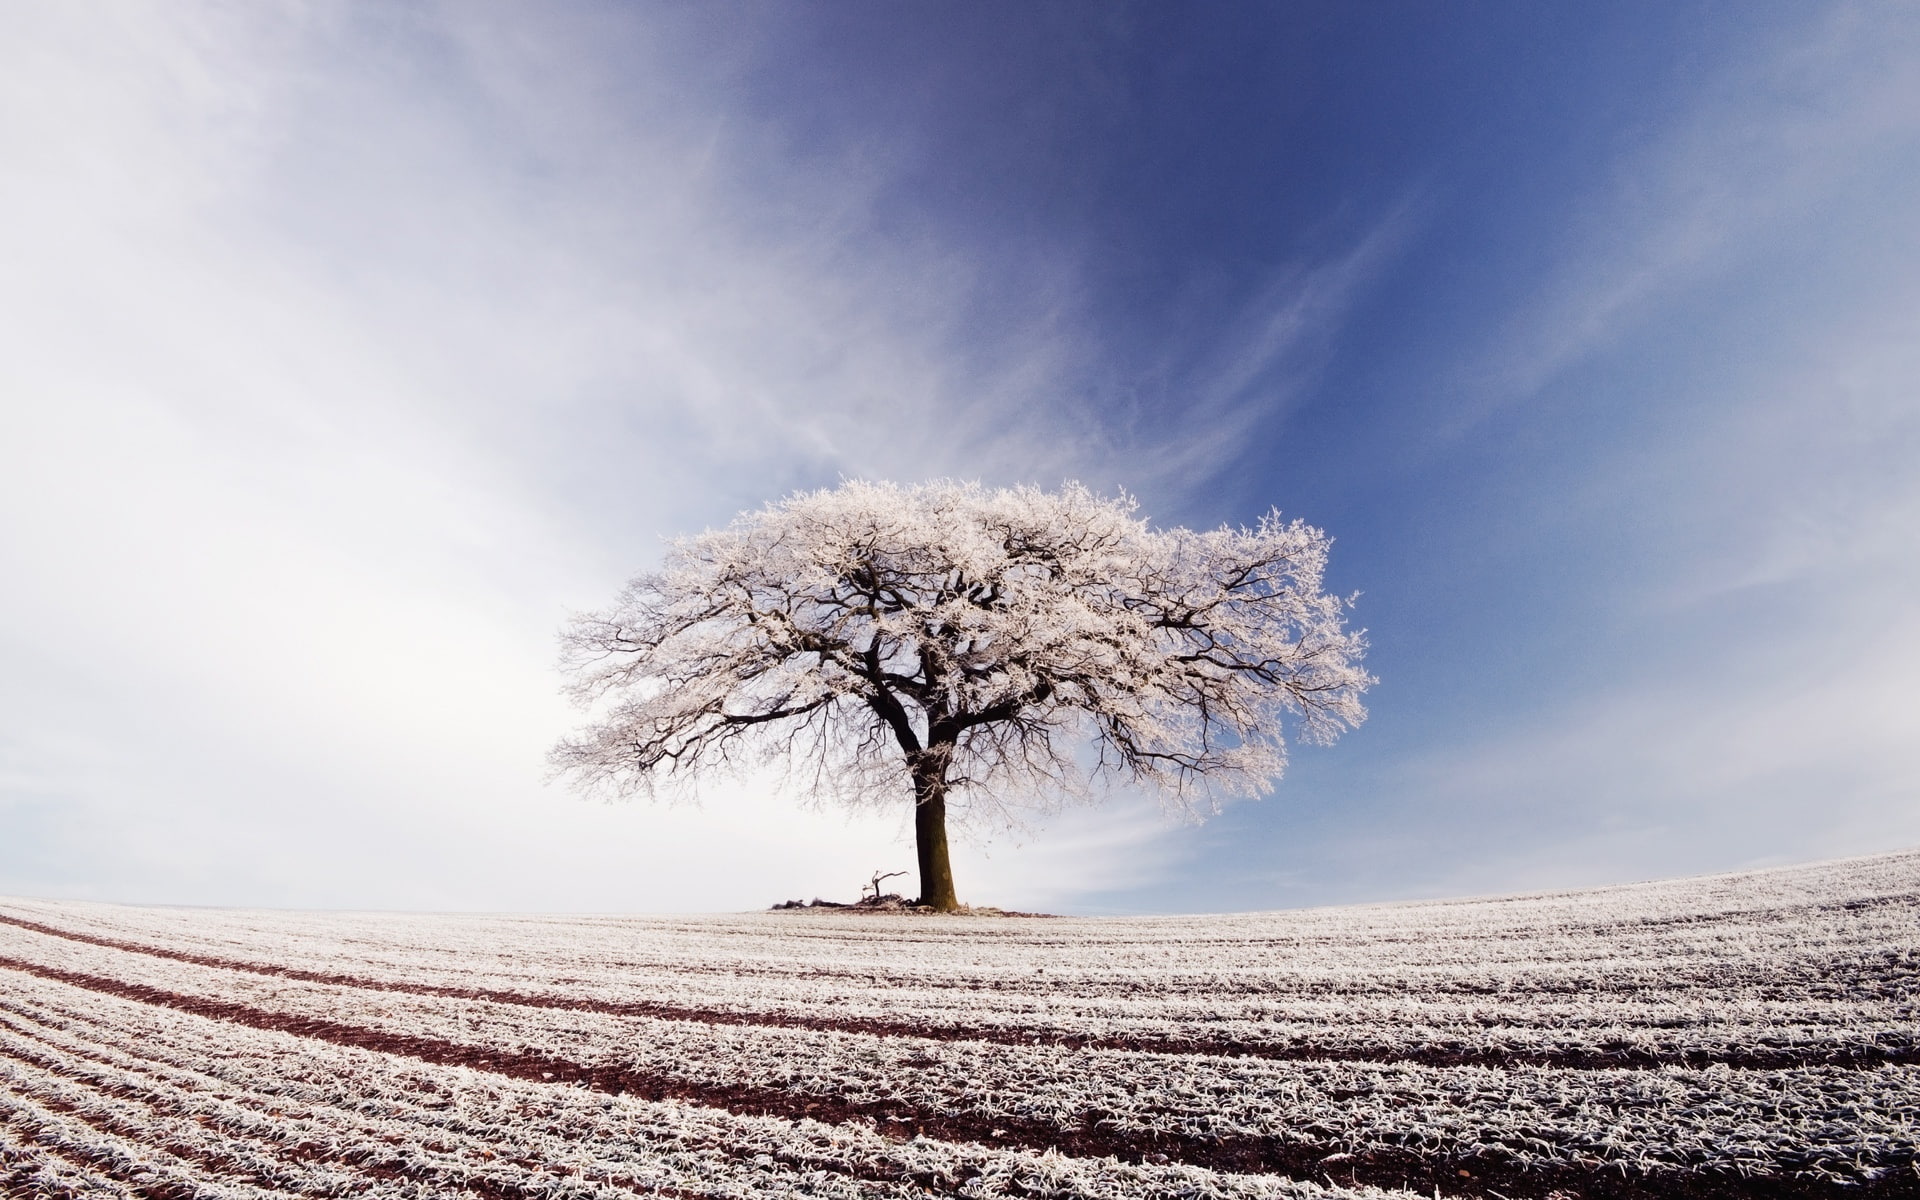 Broad field, lonely tree, blue sky, white clouds, frost